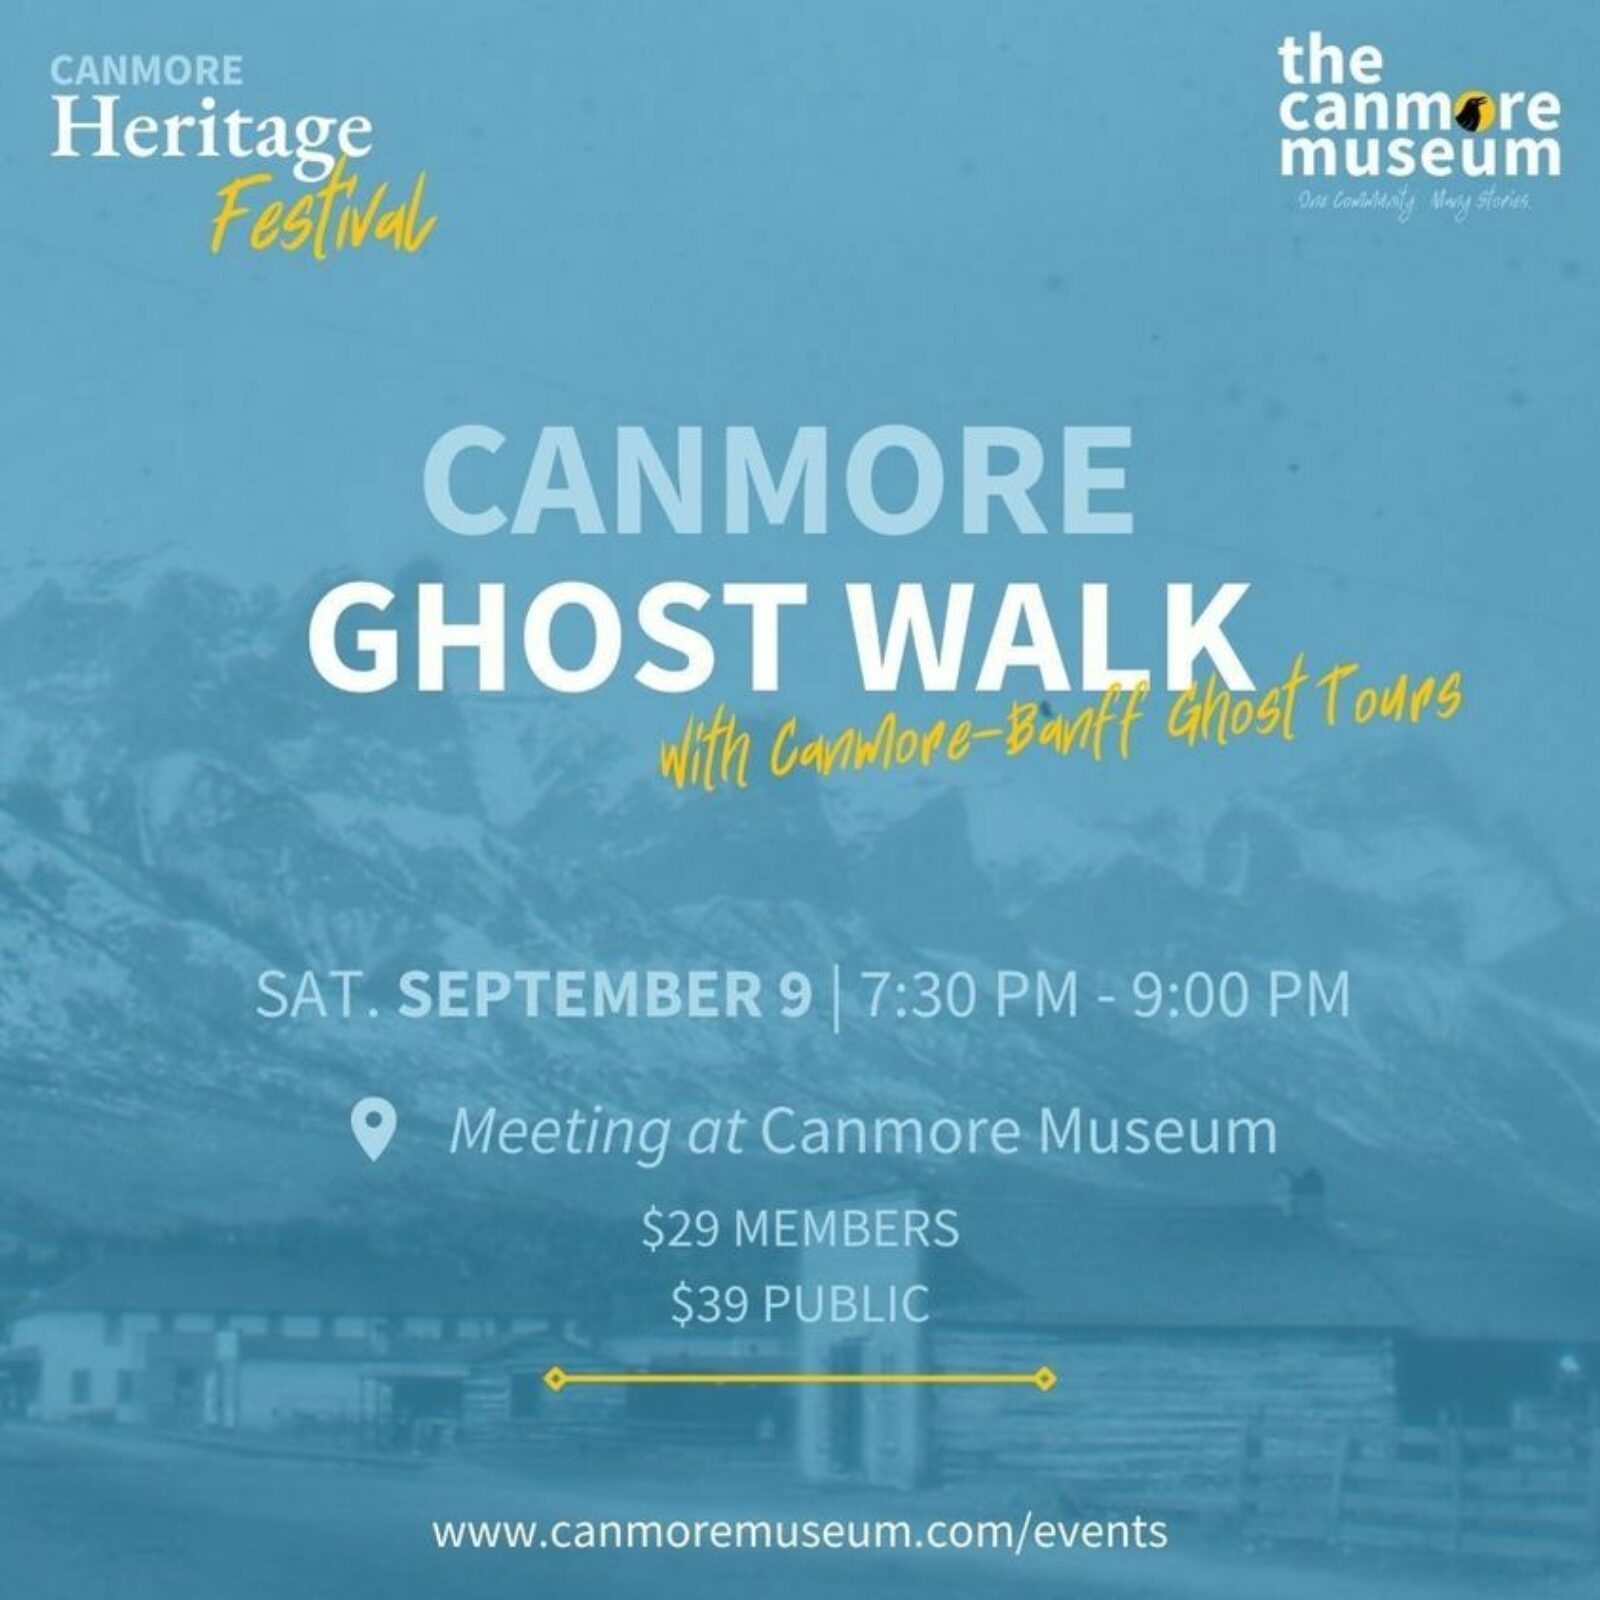 Heritage Festival Canmore Ghost Walk